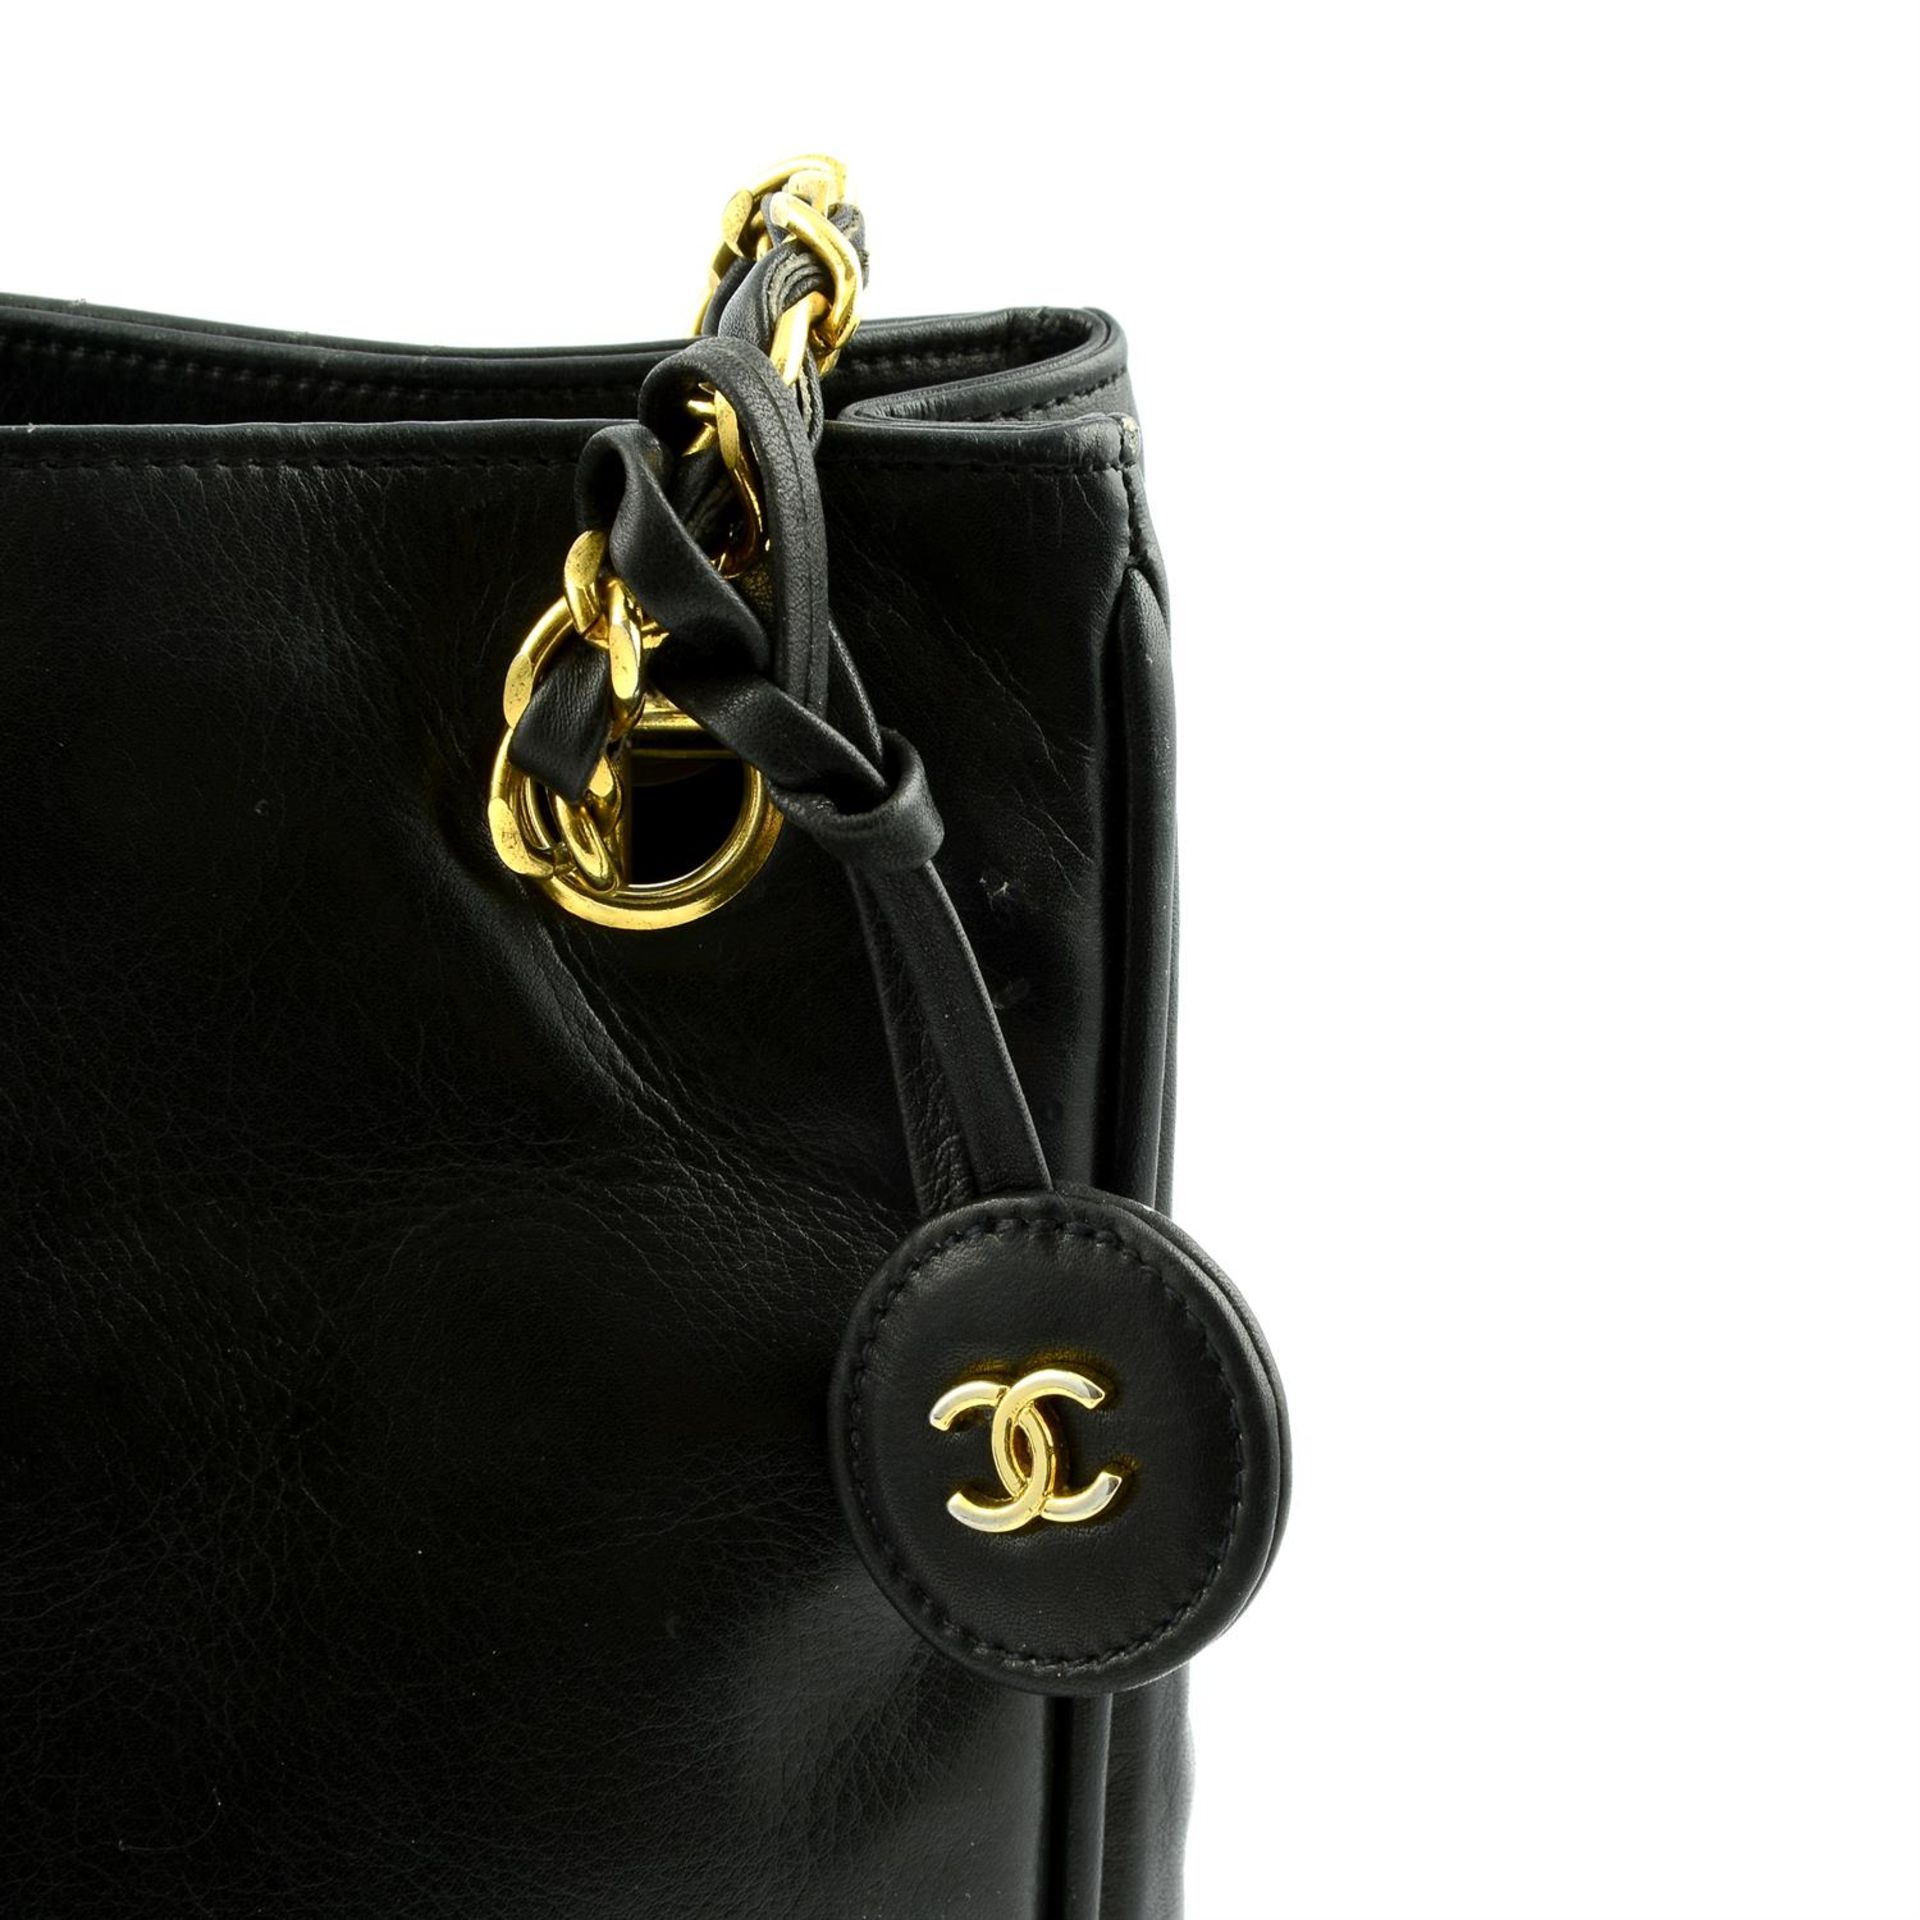 CHANEL - a 1990 black quilted tote bag. - Image 5 of 6